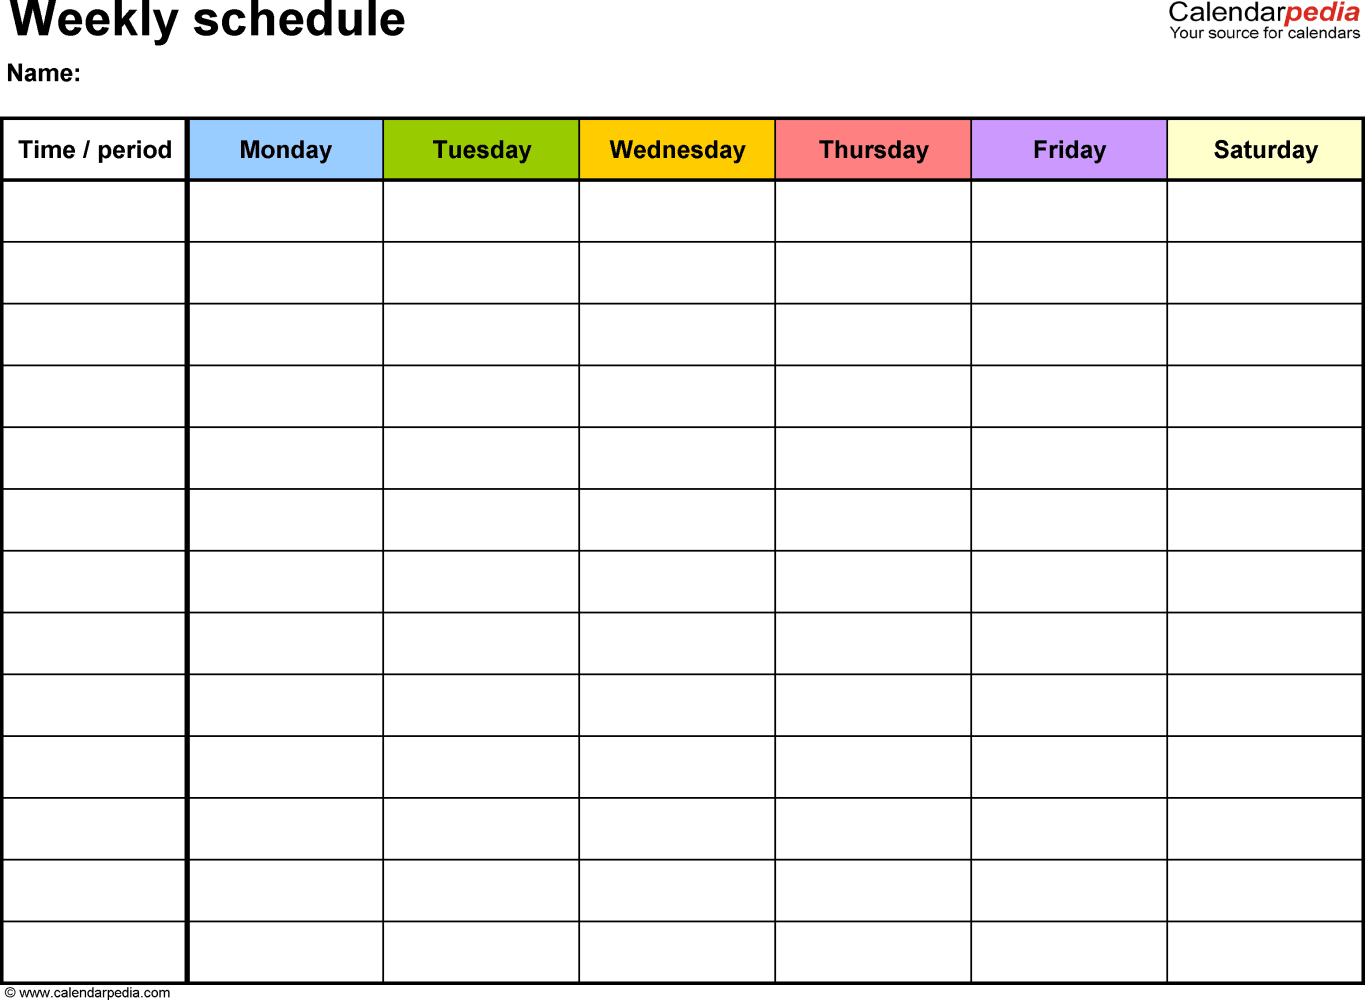 Medication Spreadsheet Organizer Throughout Free Weekly Schedule Templates For Excel  18 Templates